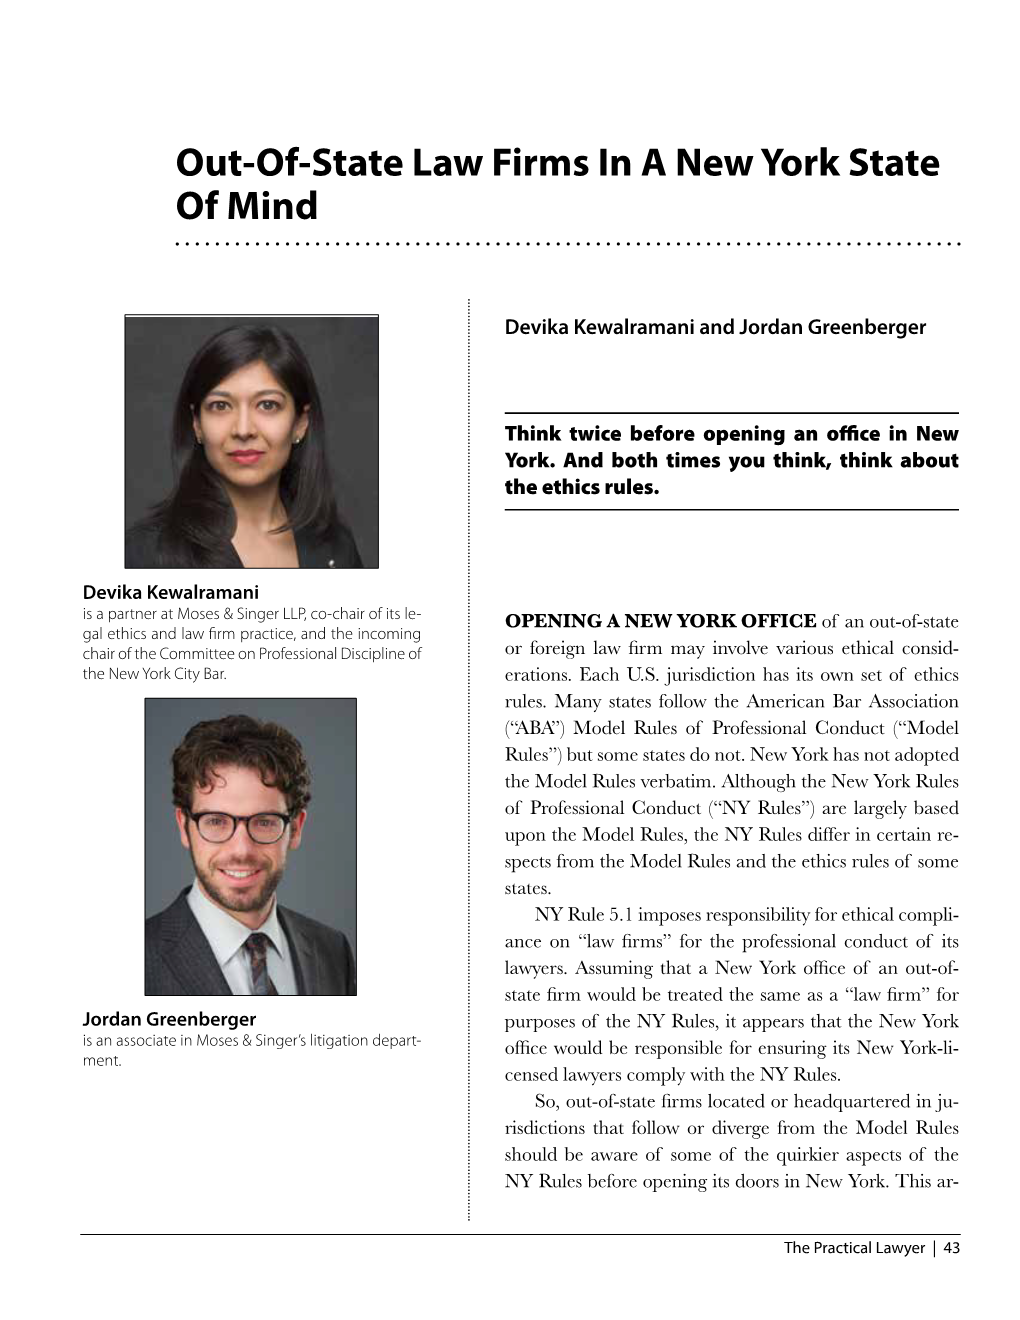 Out-Of-State Law Firms in a New York State of Mind